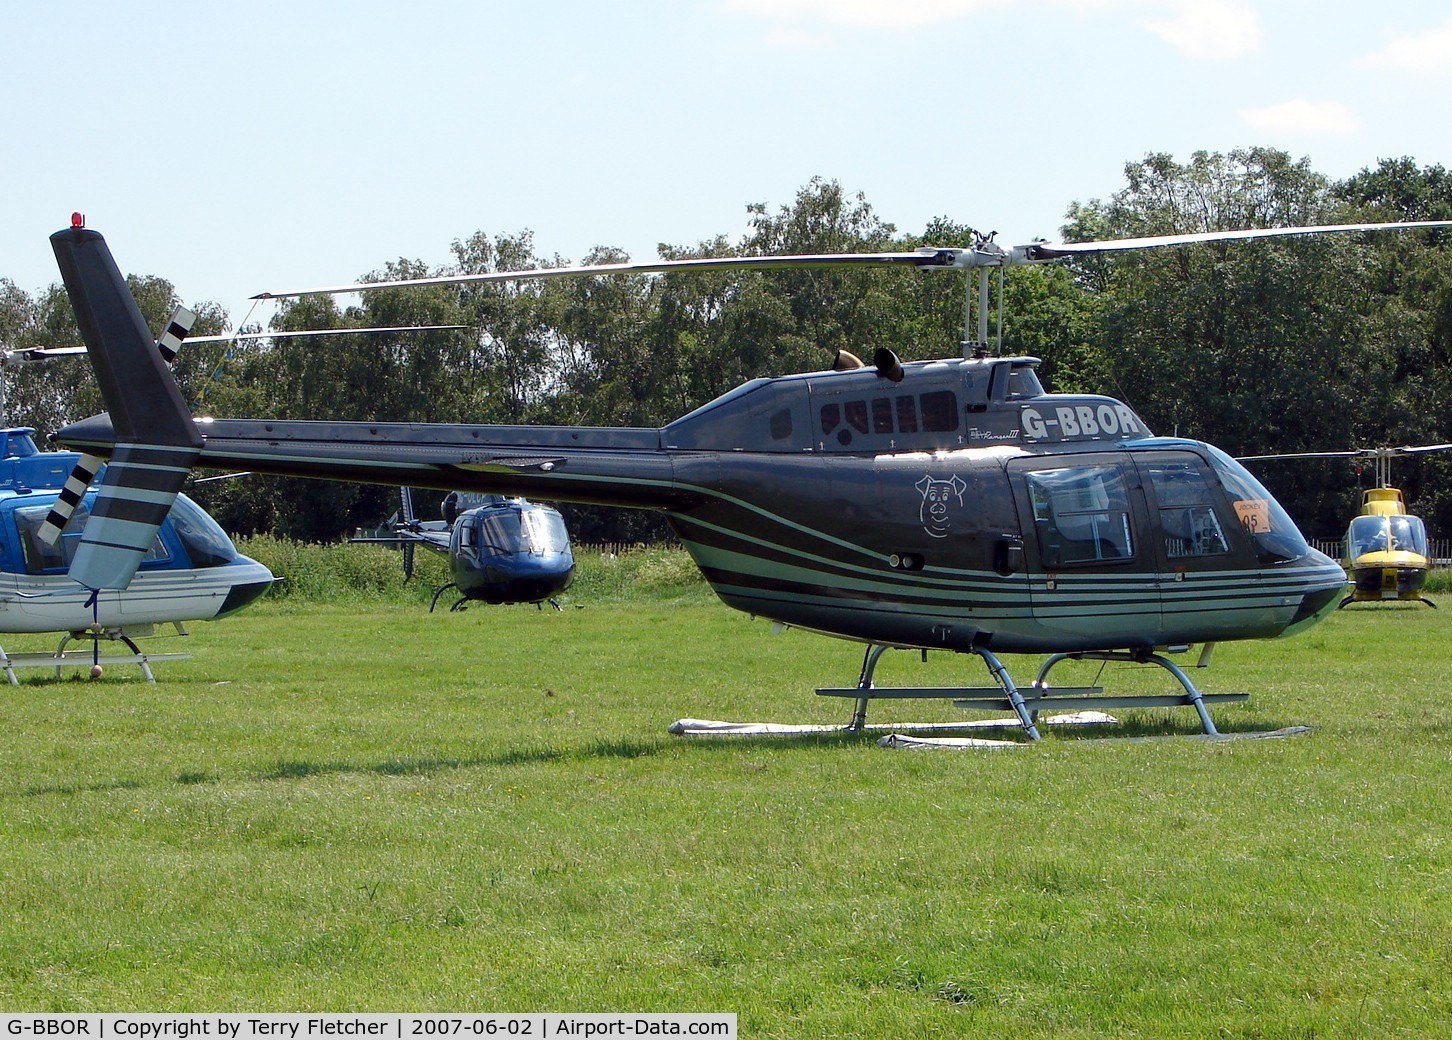 G-BBOR, 1973 Bell 206B JetRanger II C/N 1197, Helicopters arrive at the temporary Heliport on 2007 Epsom Derby Day (Horse racing)